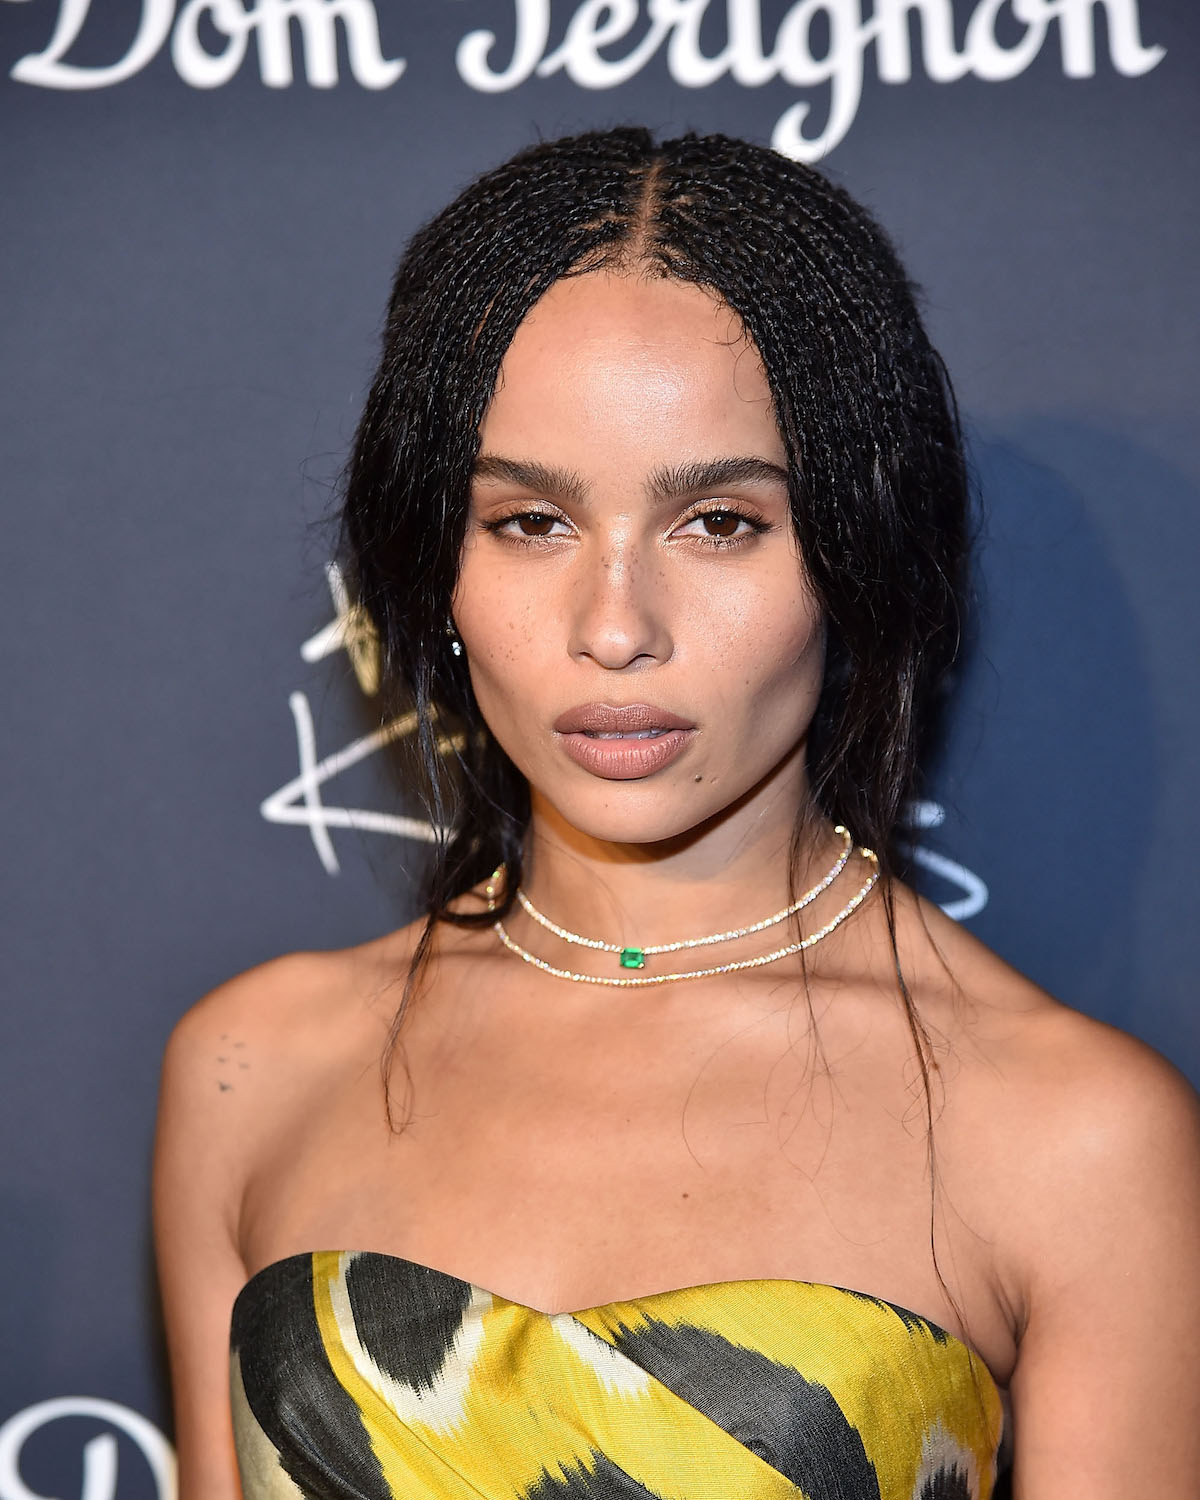 Anita Ko is known for creating natural diamond jewelry pieces that you can live in, with fans like Zoë Kravitz.